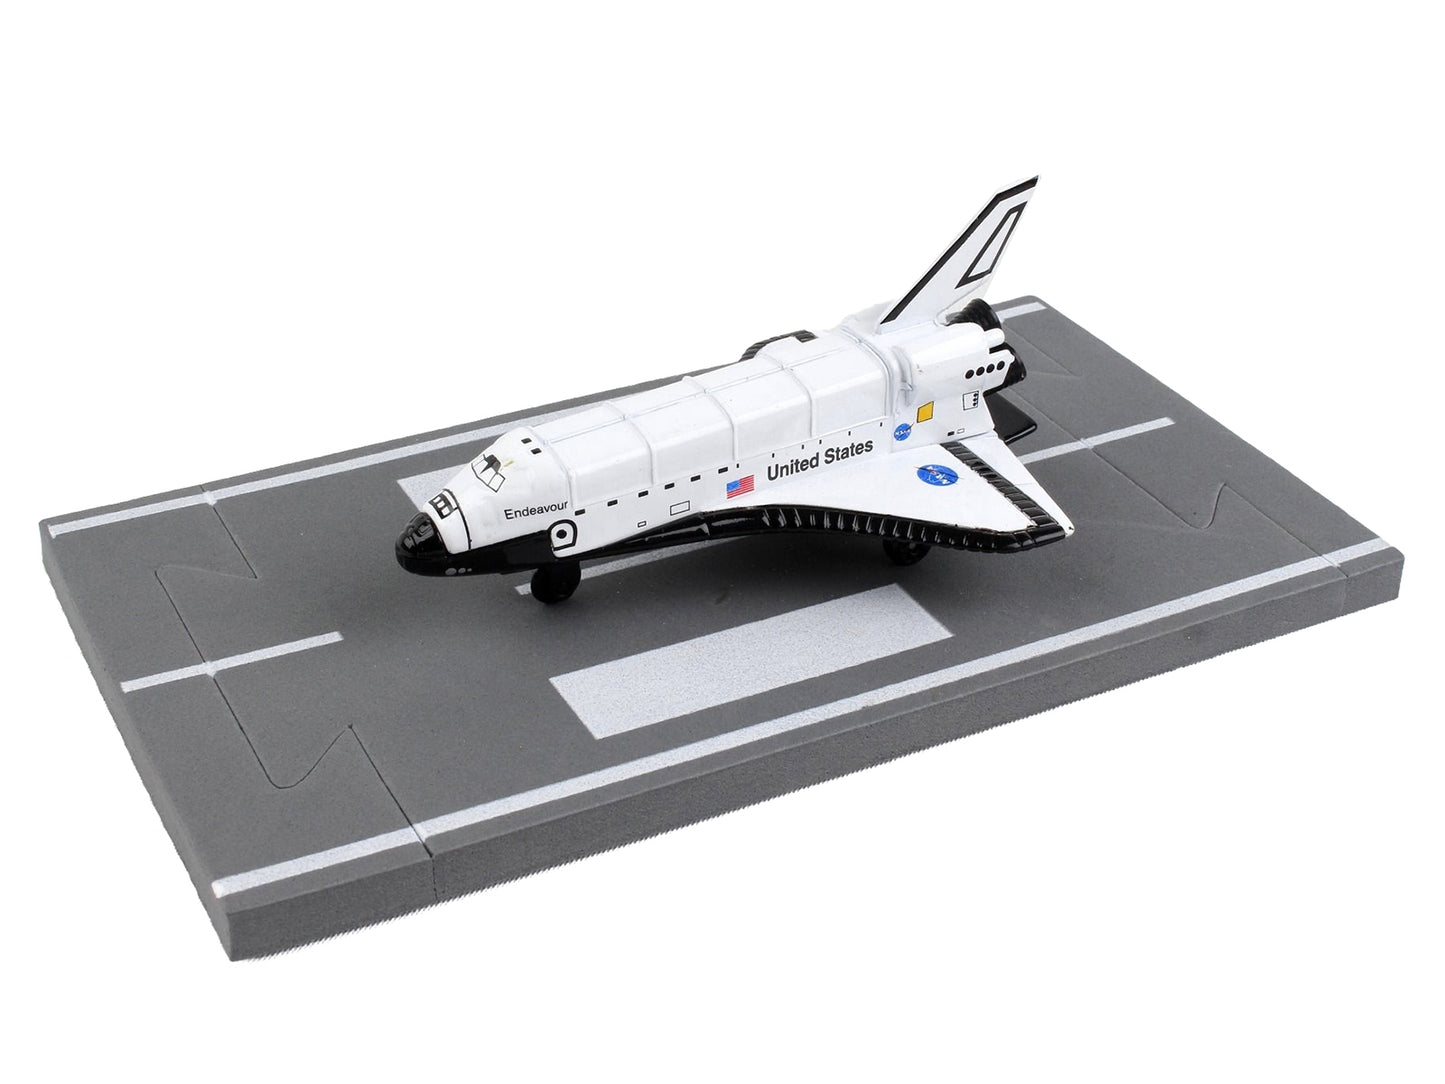 NASA "Endeavour" Space Shuttle White "United States" with Runway Section Diecast Model Airplane by Runway24